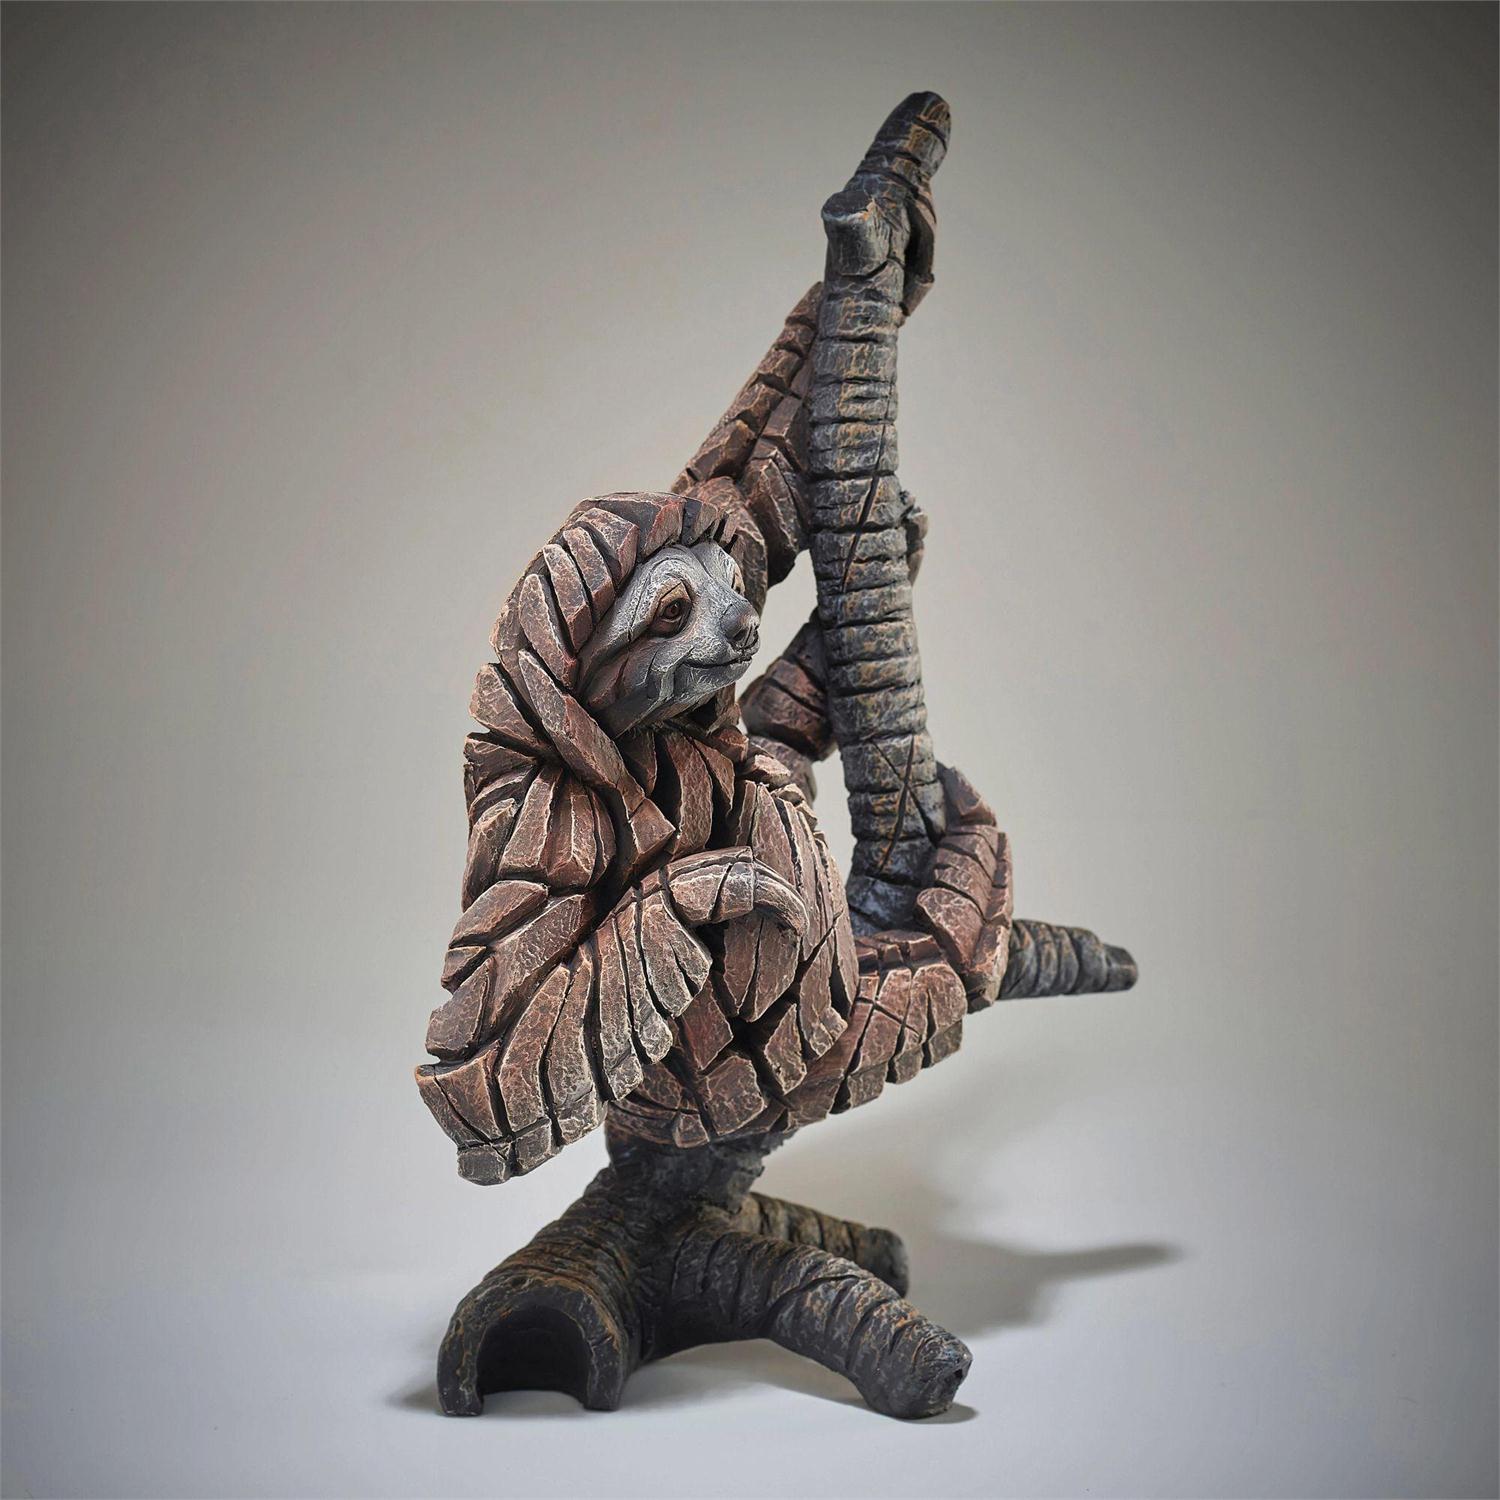 Enesco Gifts Artist Matt Buckley The Edge Sculpture Sloth Sculpture Free Shipping Iveys Gifts And Decor